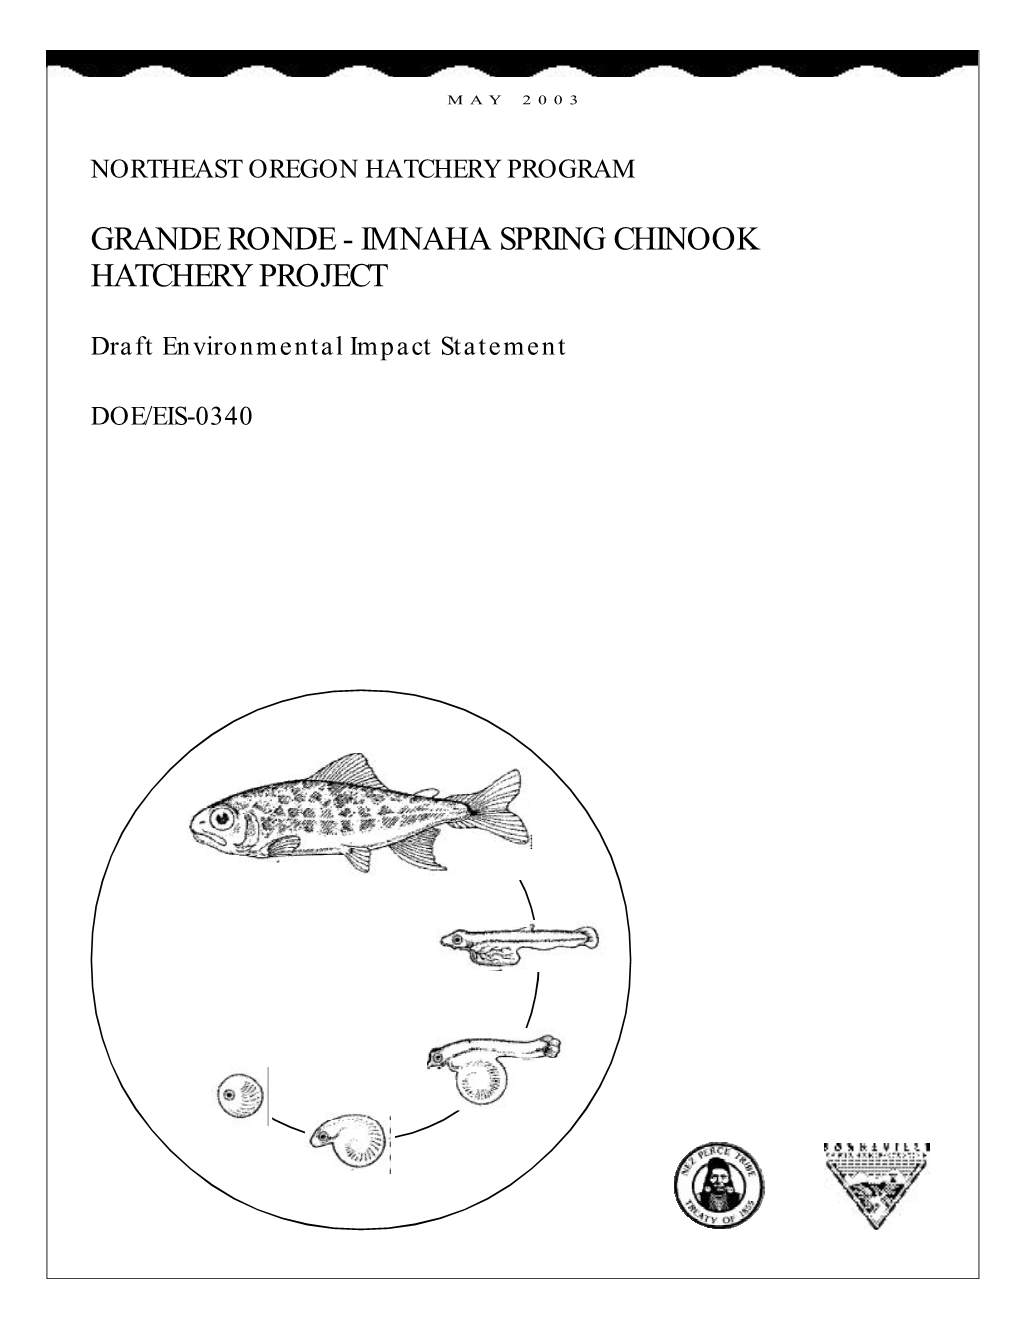 Grande Ronde - Imnaha Spring Chinook Hatchery Project